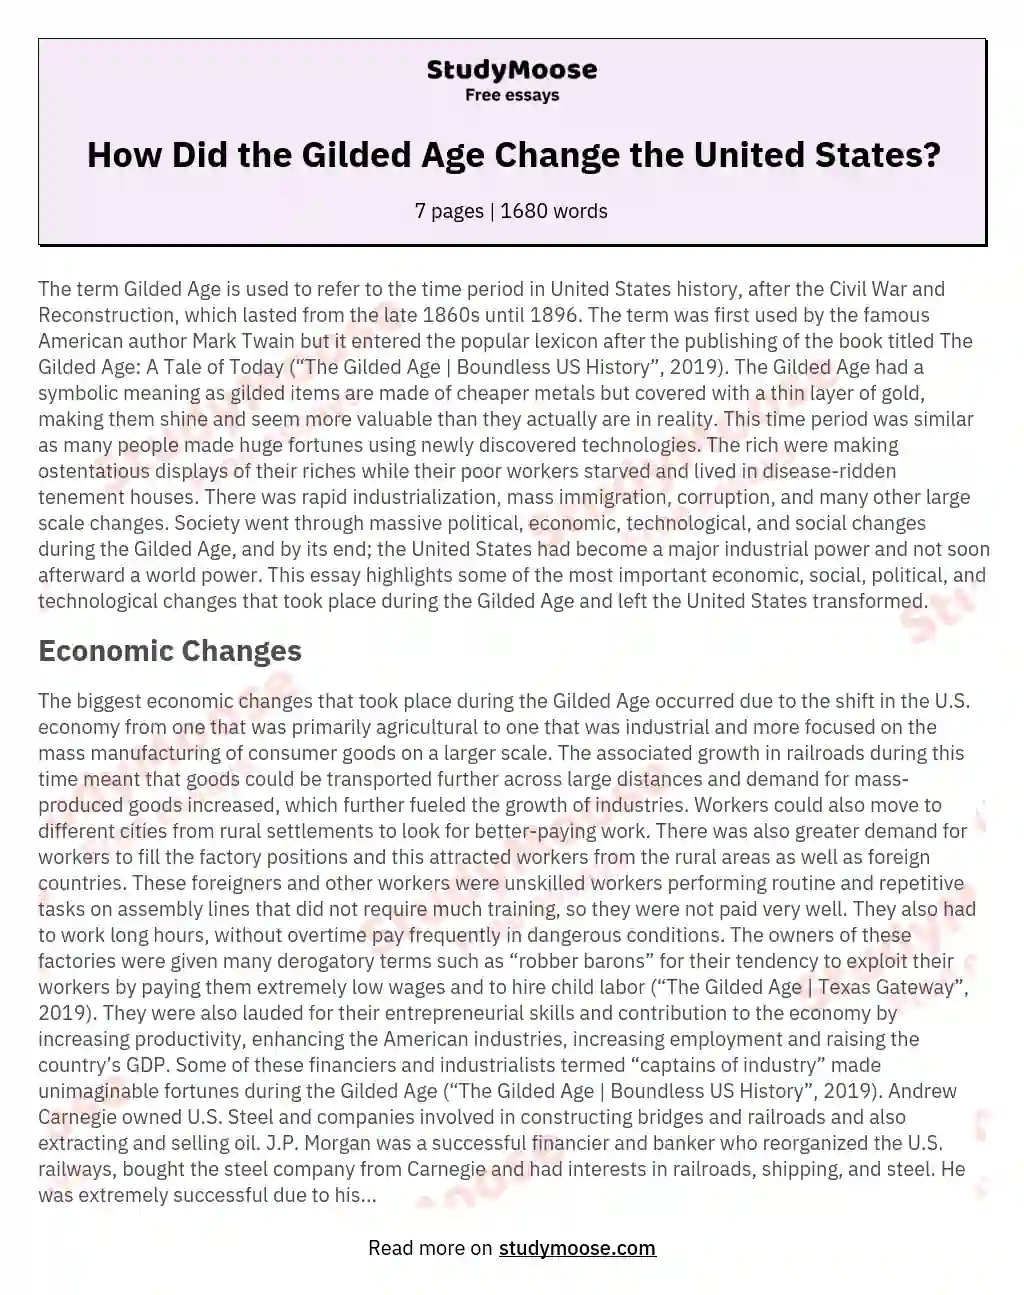 How Did the Gilded Age Change the United States?